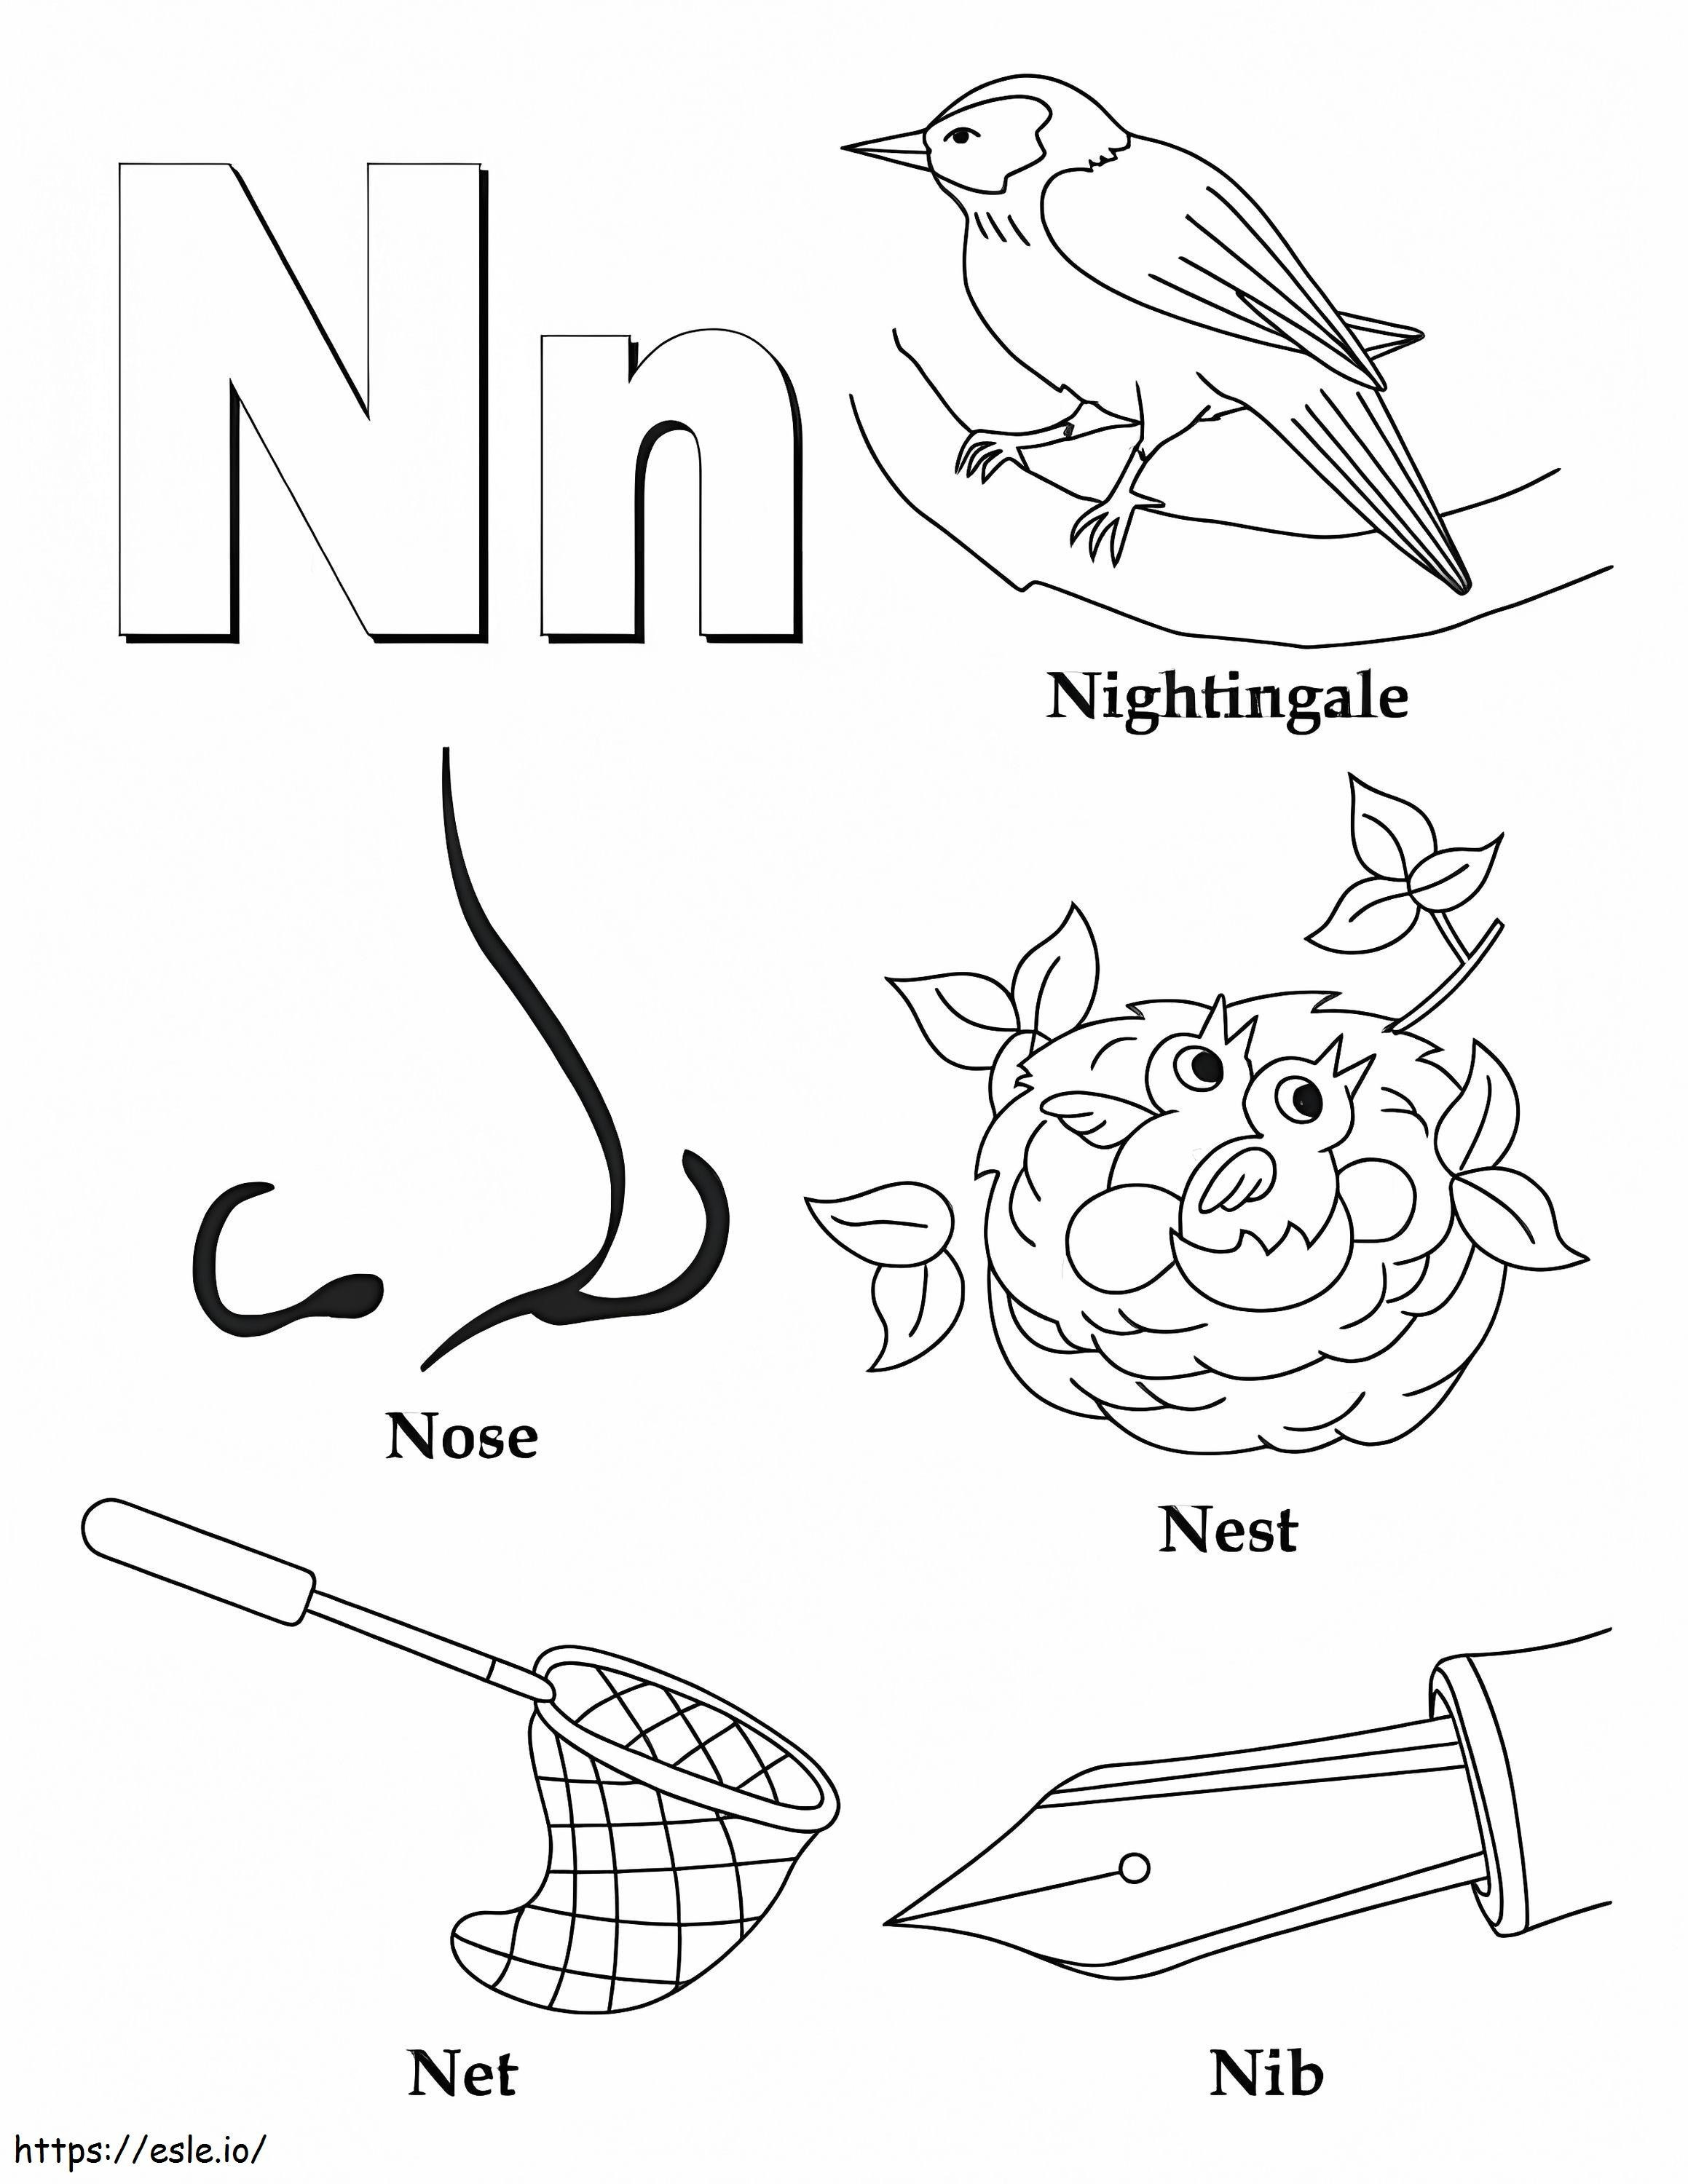 Nightingale Nose Nest Red Feather Letter N coloring page